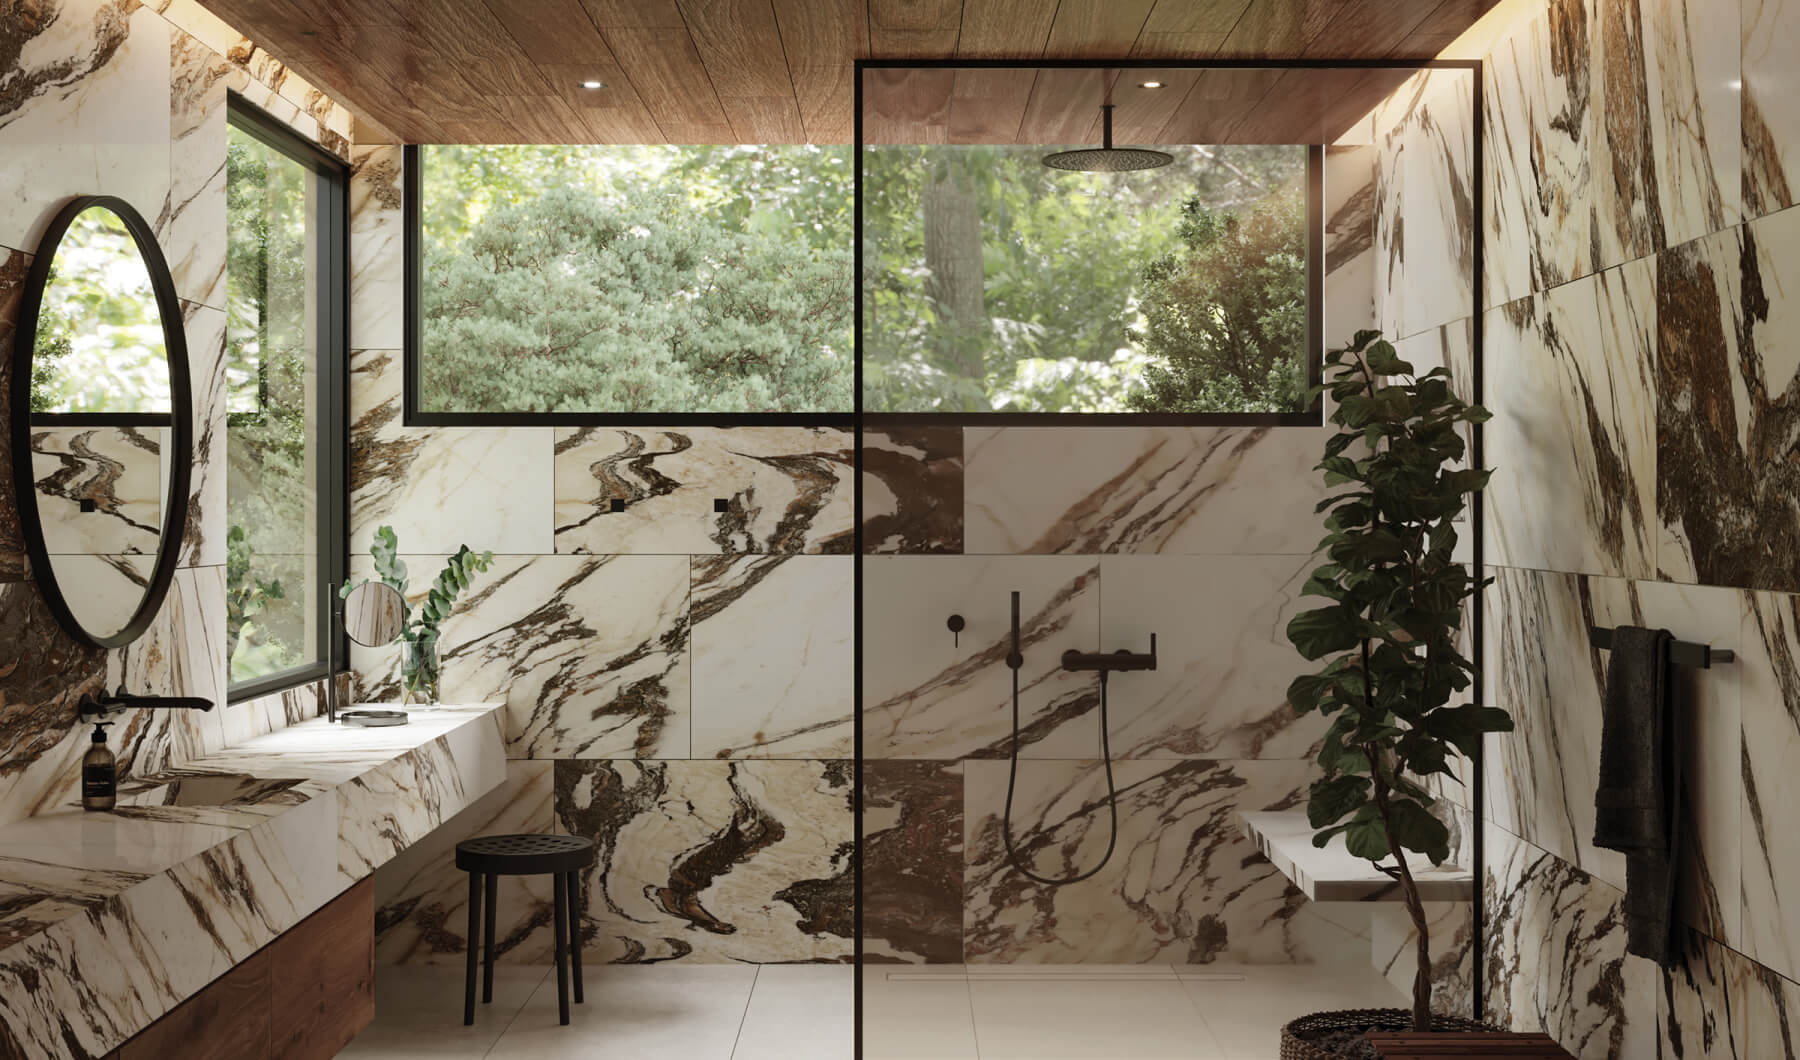 Luxurious bathroom with dramatic marble walls in swirling brown and cream hues, complemented by lush greenery and natural light